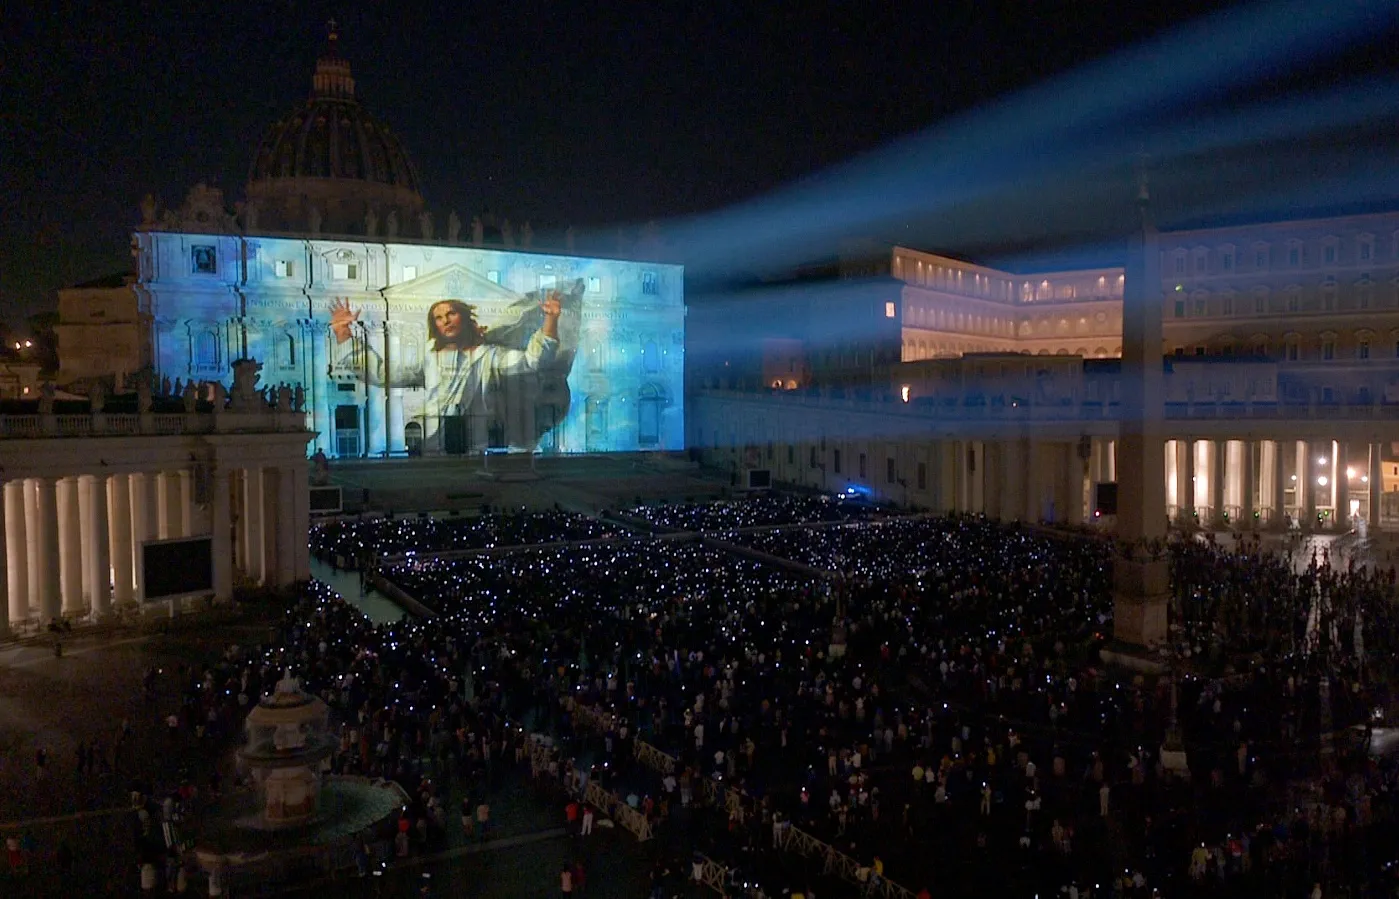 The facade of St. Peter’s Basilica was illuminated on Sunday, Oct. 2, 2022, with 3-D projection mapping of Renaissance art from the Vatican Museums in a new light display titled “Follow Me: The Life of St. Peter.” The display will be projected on the facade of St. Peter’s Basilica every 15 minutes between 9 p.m. and 11 p.m. each night through Oct. 16, 2022.?w=200&h=150